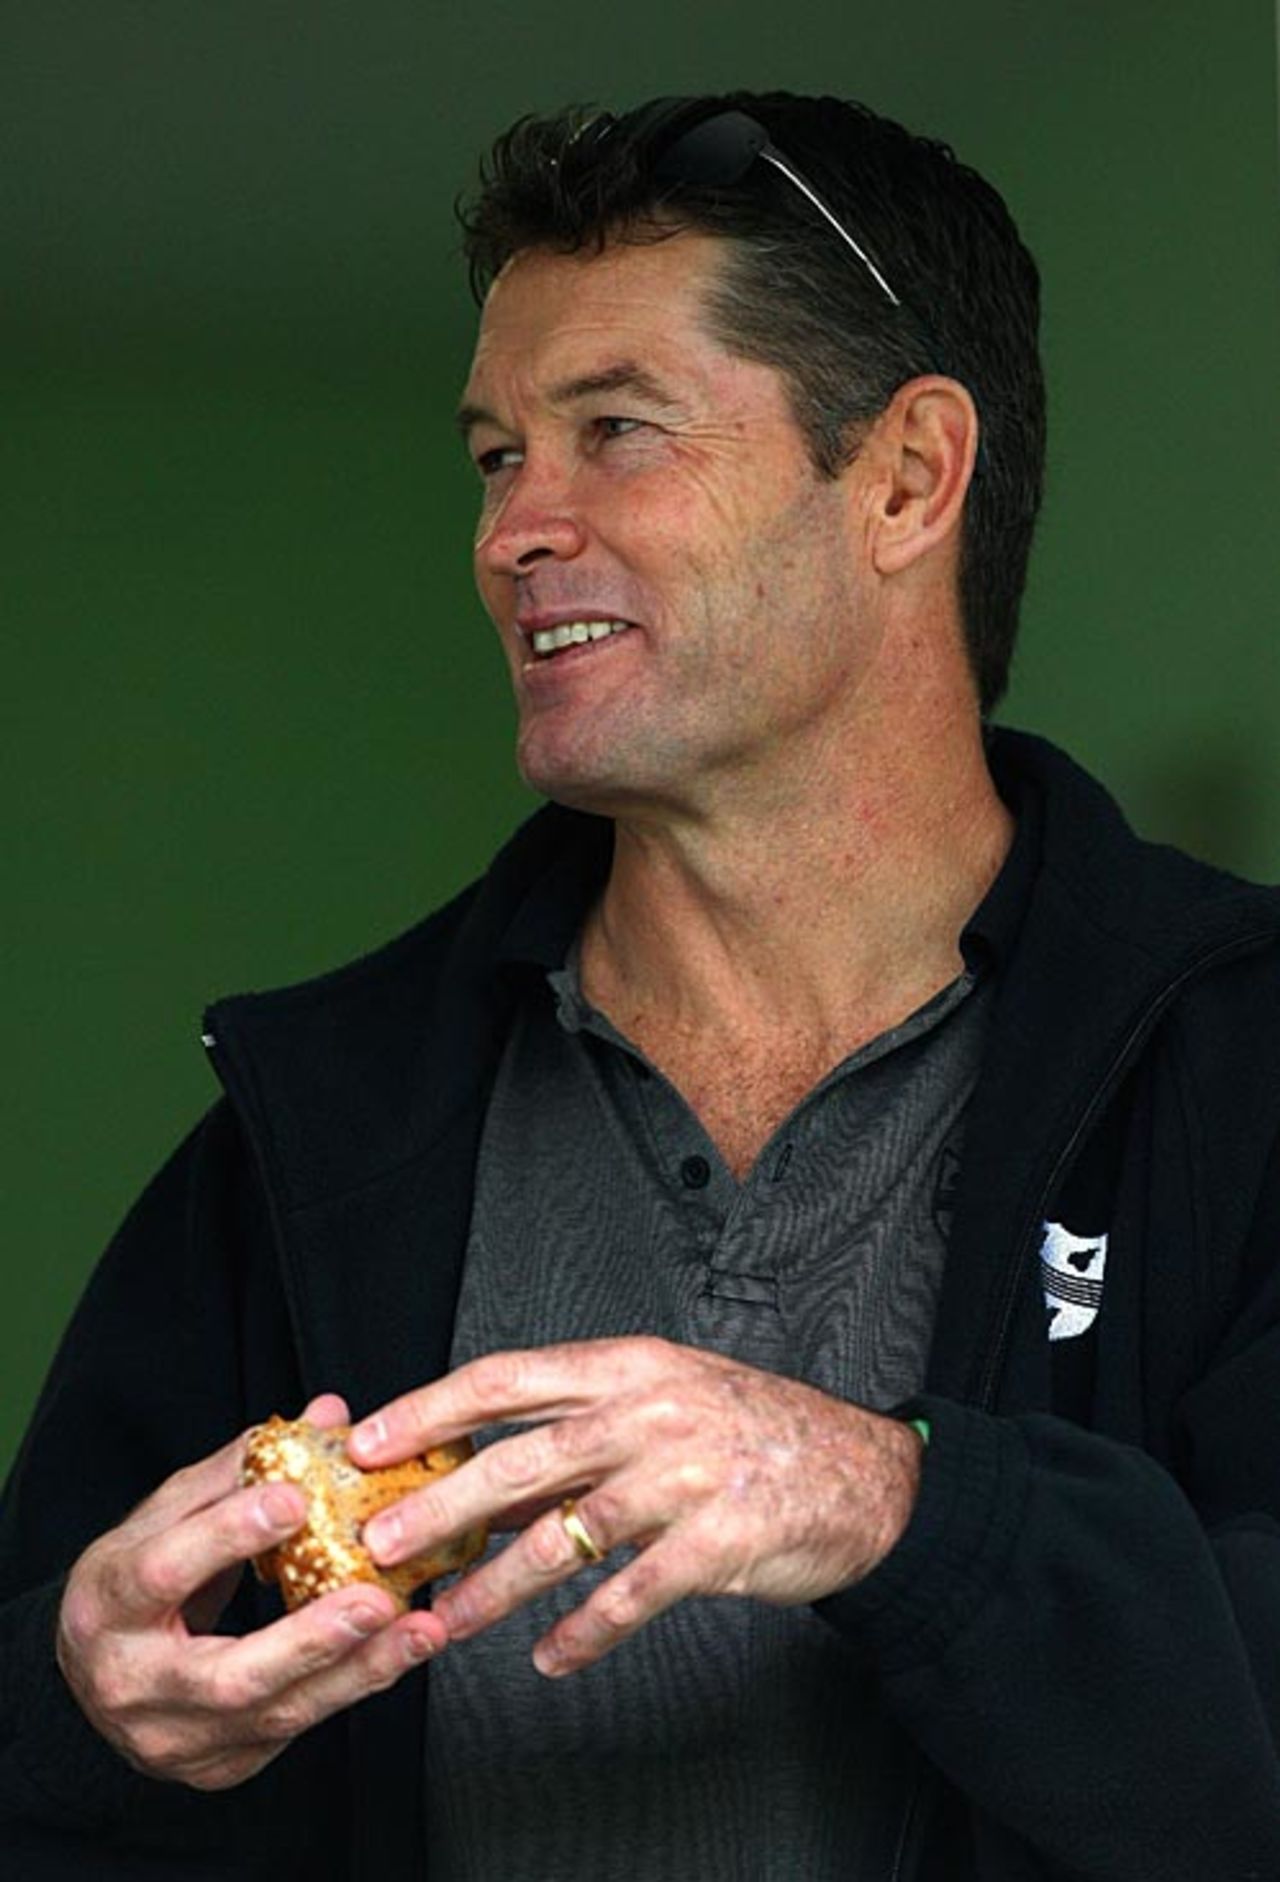 Graeme Hick was ruled out of his final Championship match because of an injury, Worcestershire v Middlesex, Kidderminister,  County Championship, September 17, 2008